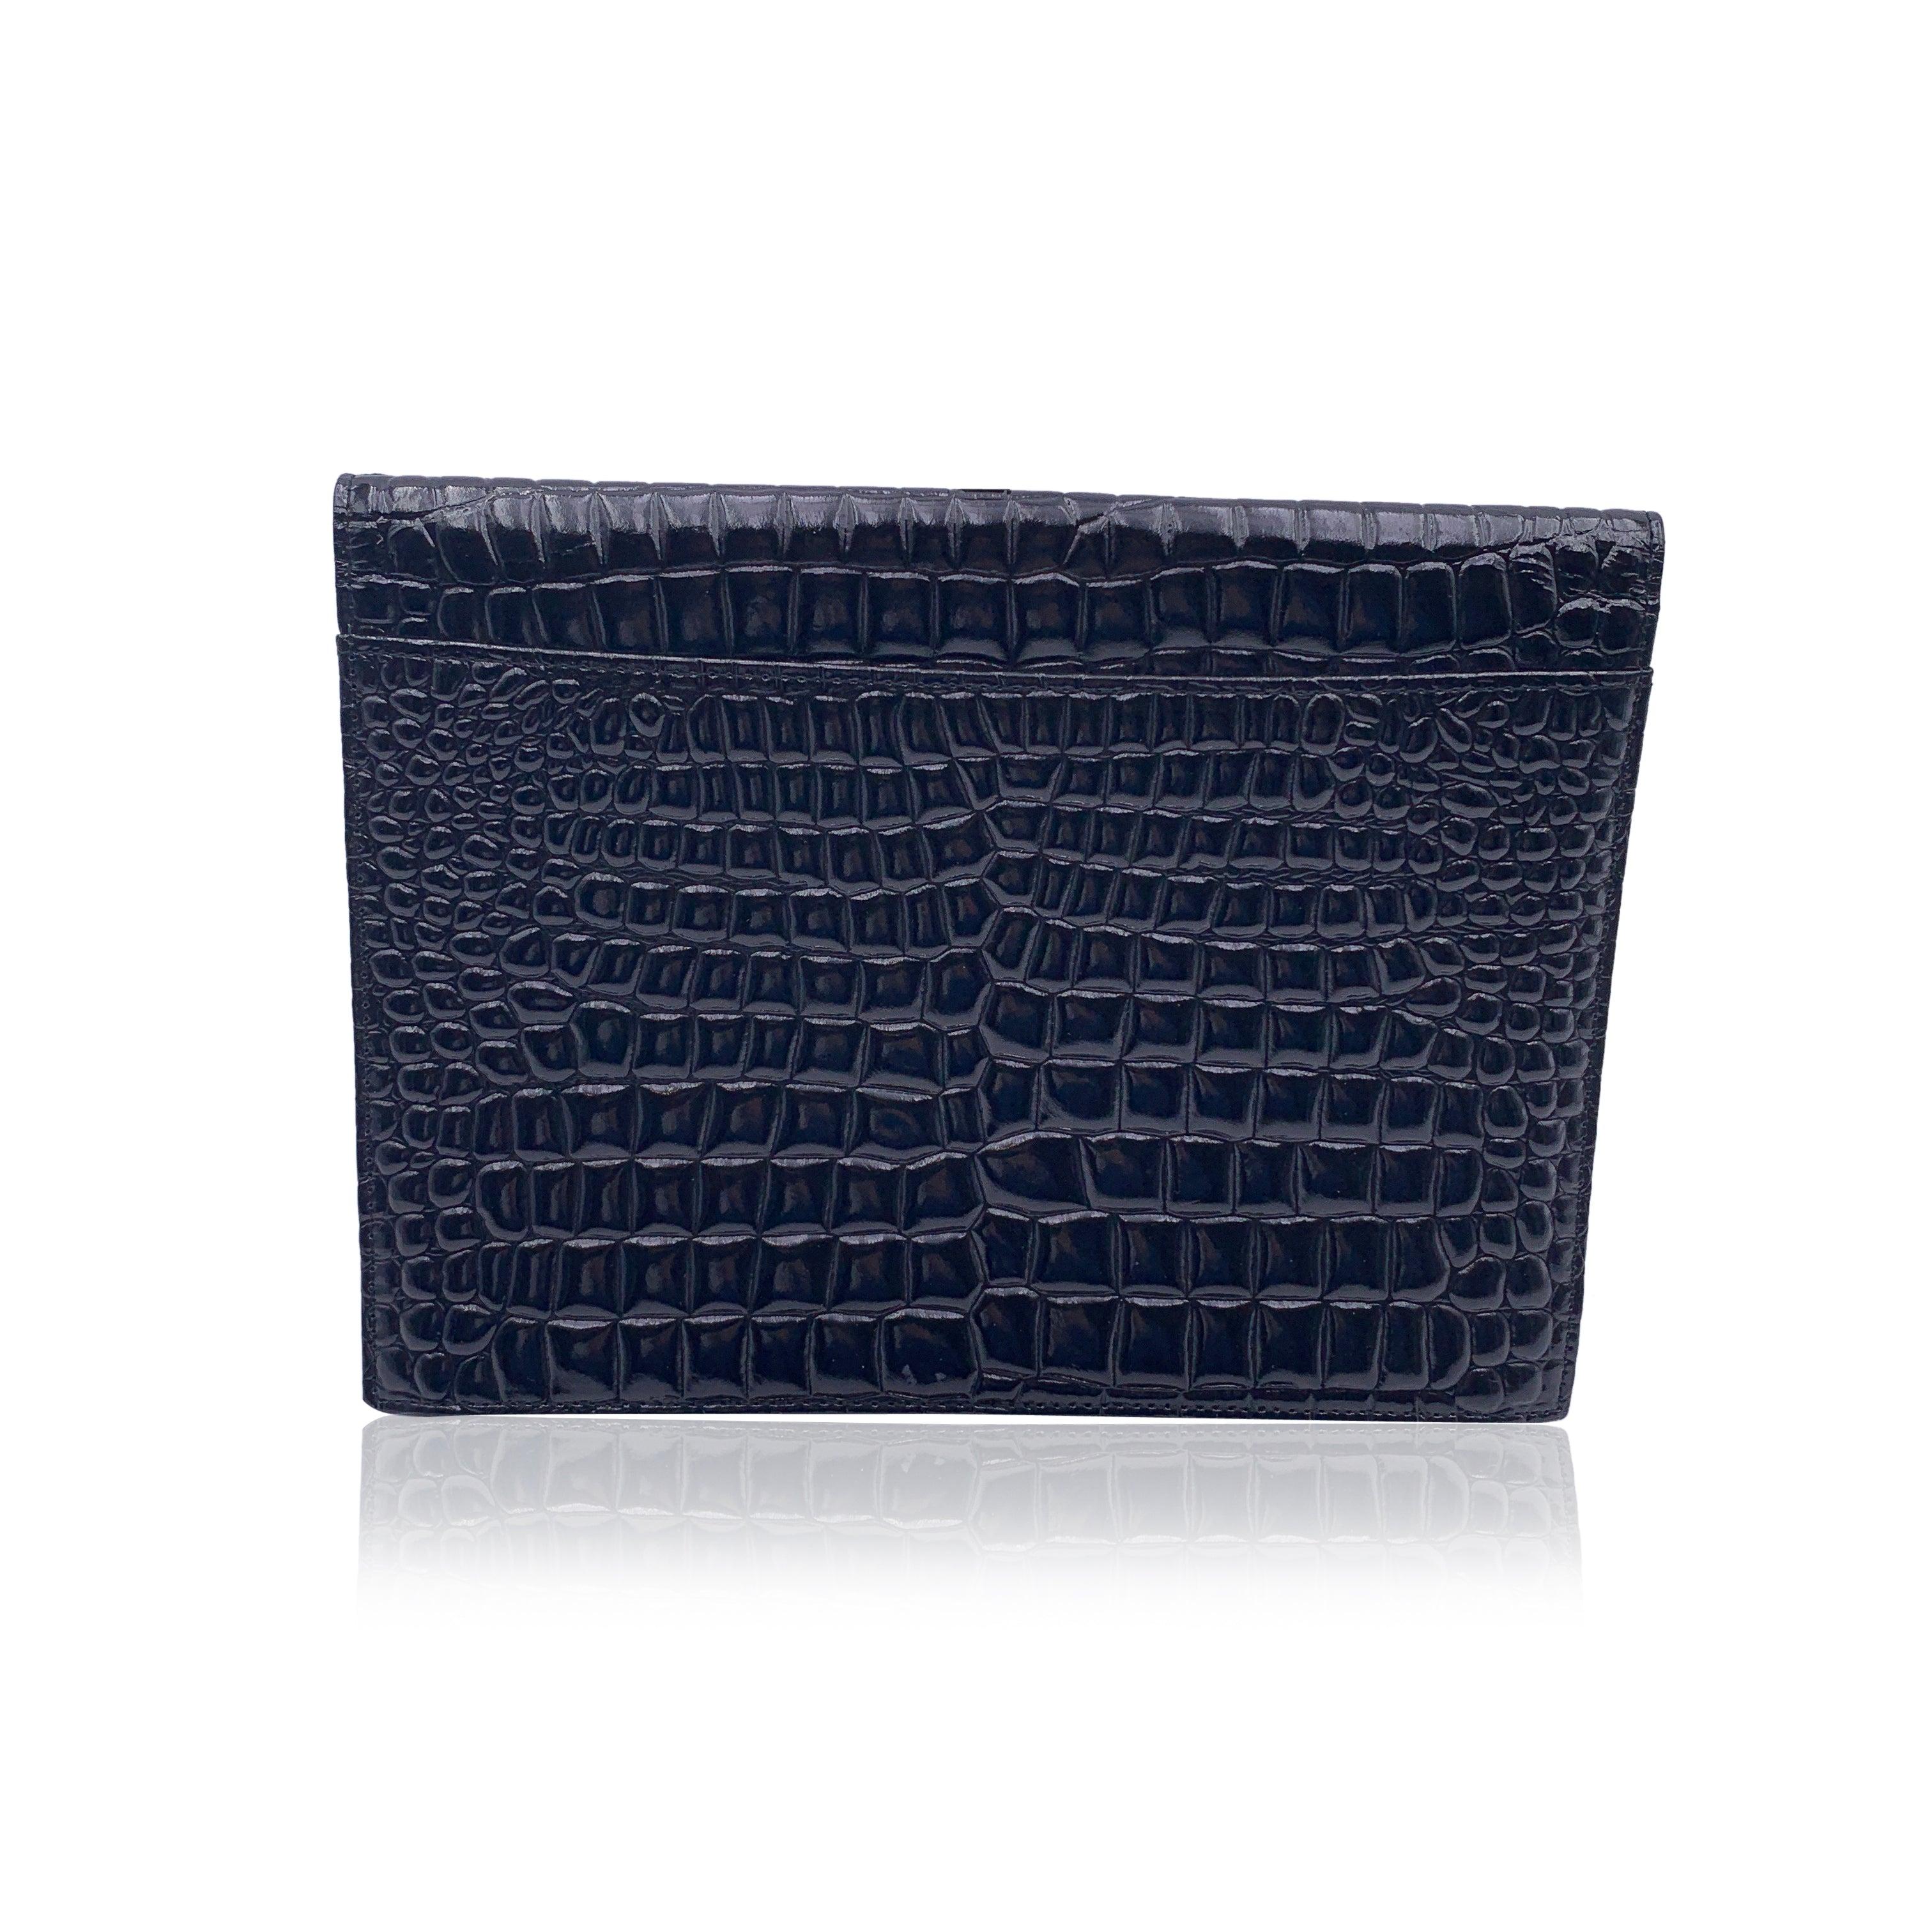 Yves Saint Laurent Vintage Black Leather Embossed Flap Clutch Purse In Excellent Condition For Sale In Rome, Rome